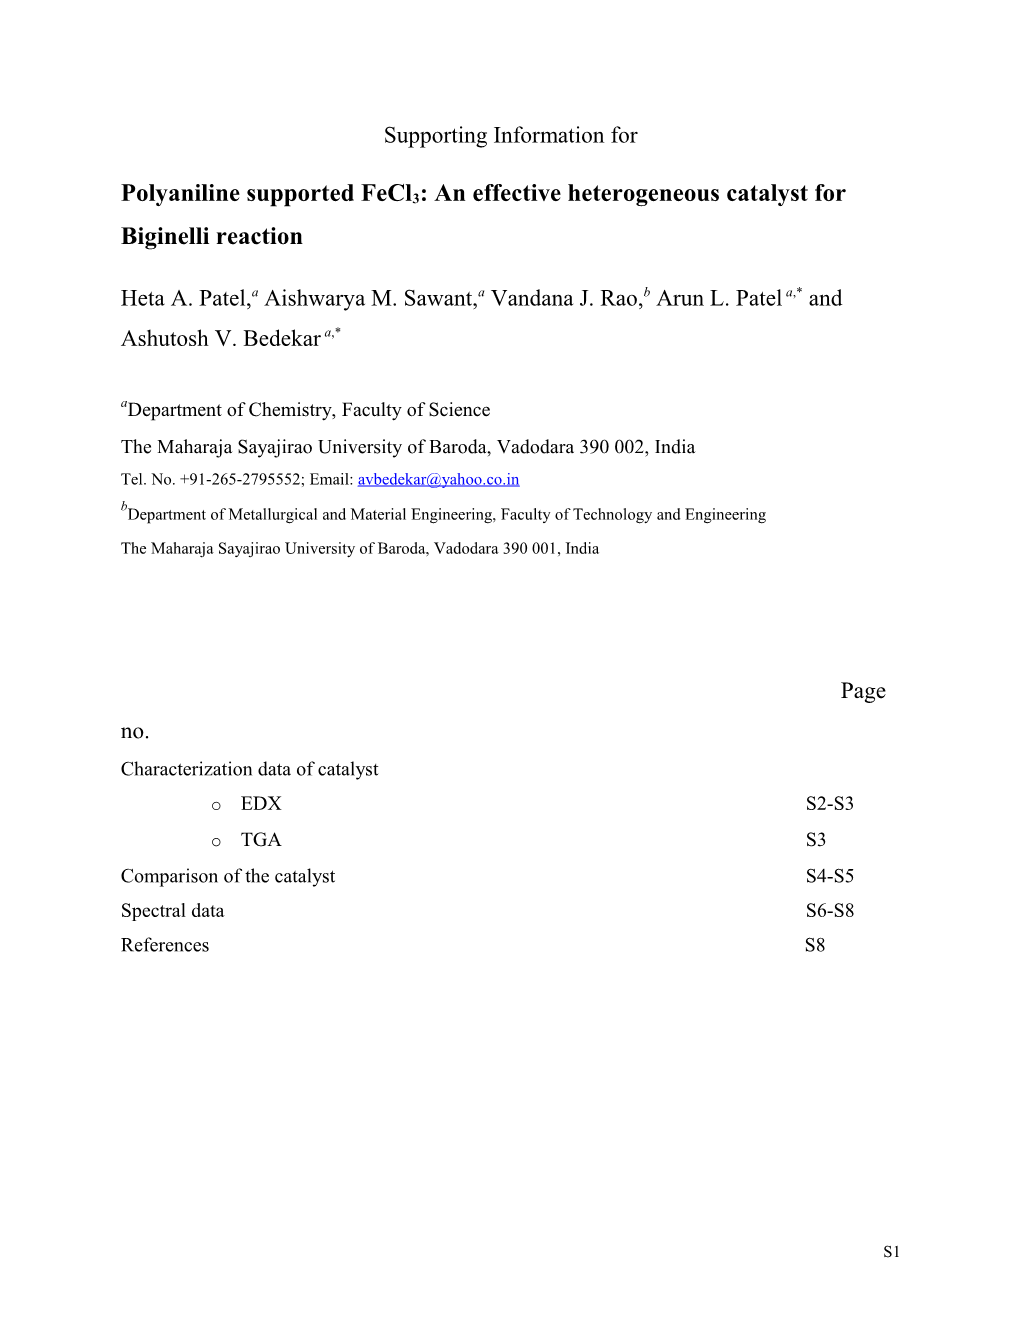 Polyaniline Supported Fecl3: an Effective Heterogeneous Catalyst for Biginelli Reaction